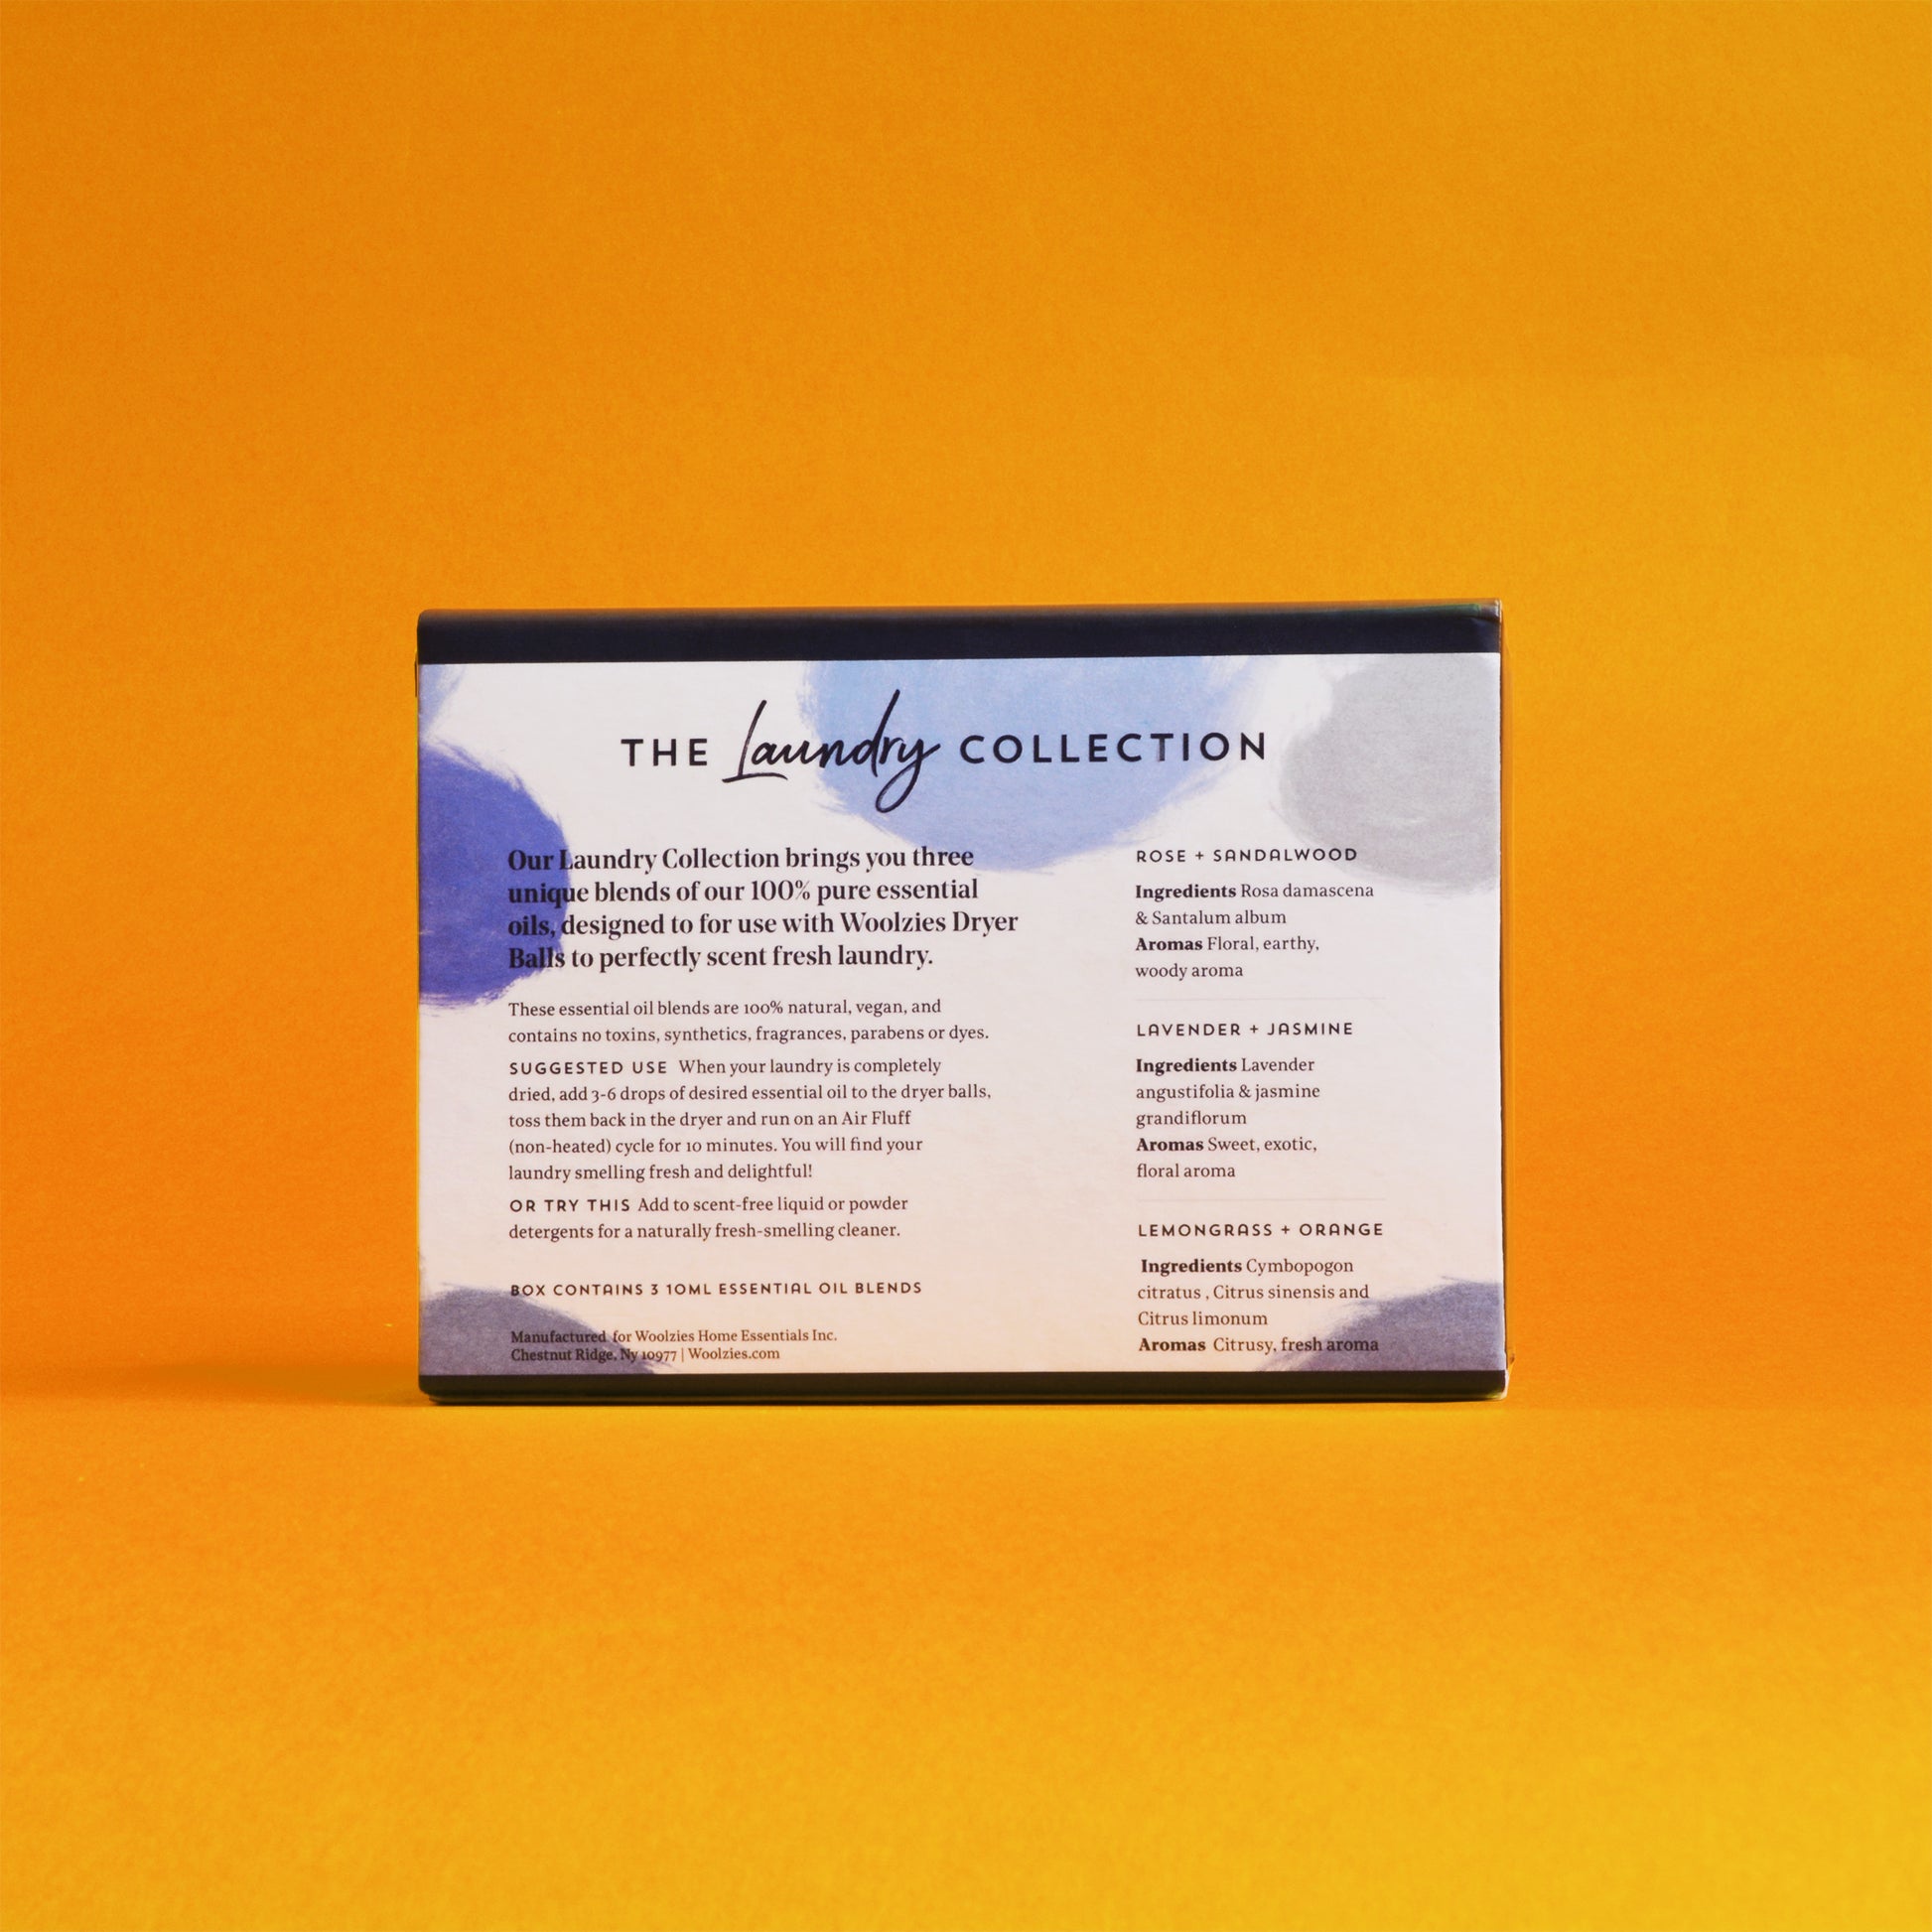 Back of packaging, showing info about how to use Woolzies essential oils for laundry